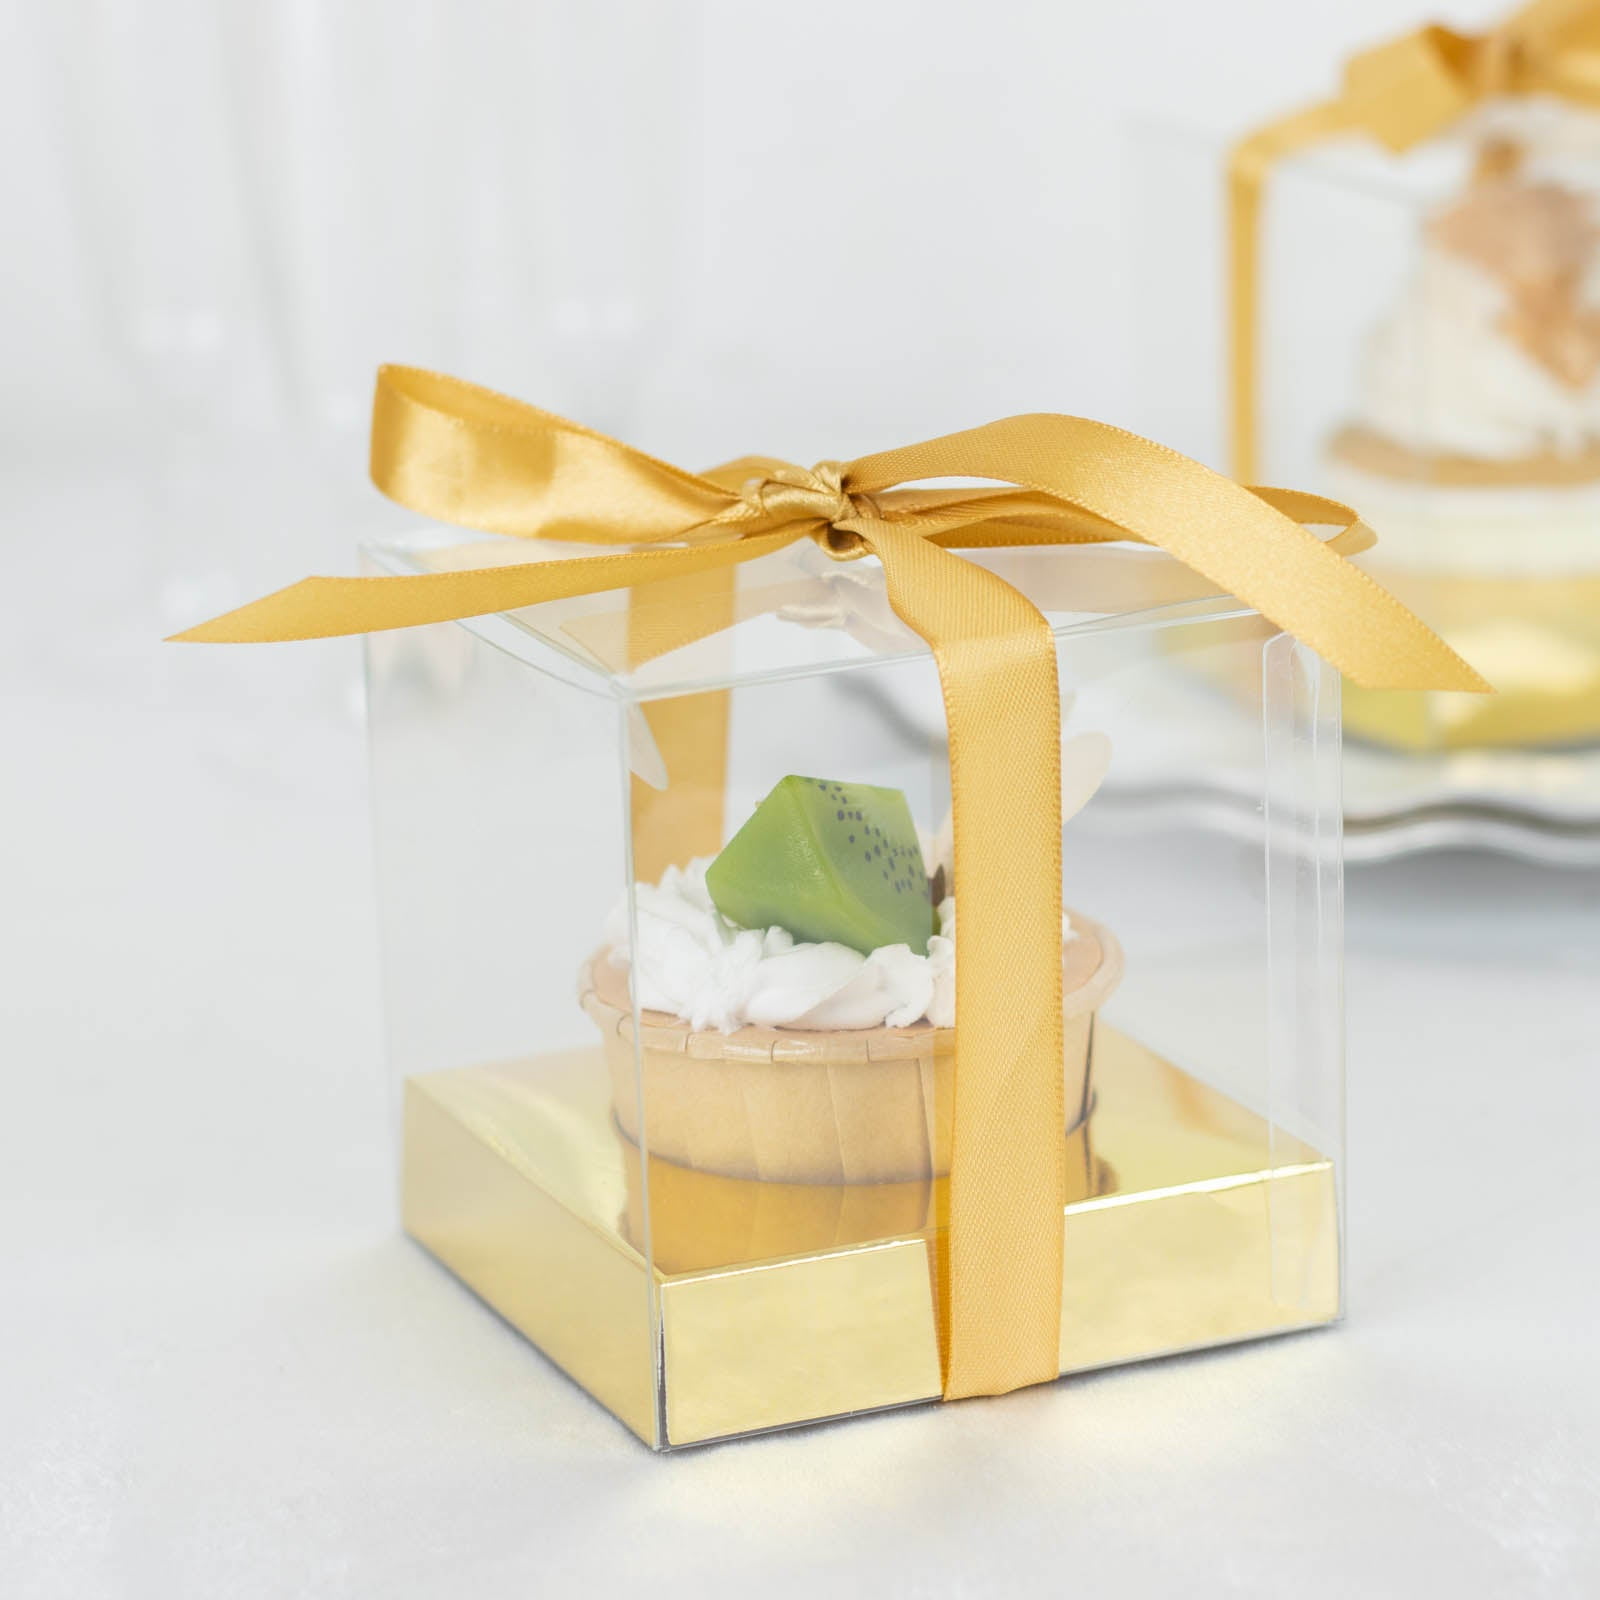 12 Clear 3 Square Bow Top Design Favor Boxes Gift Holders Party